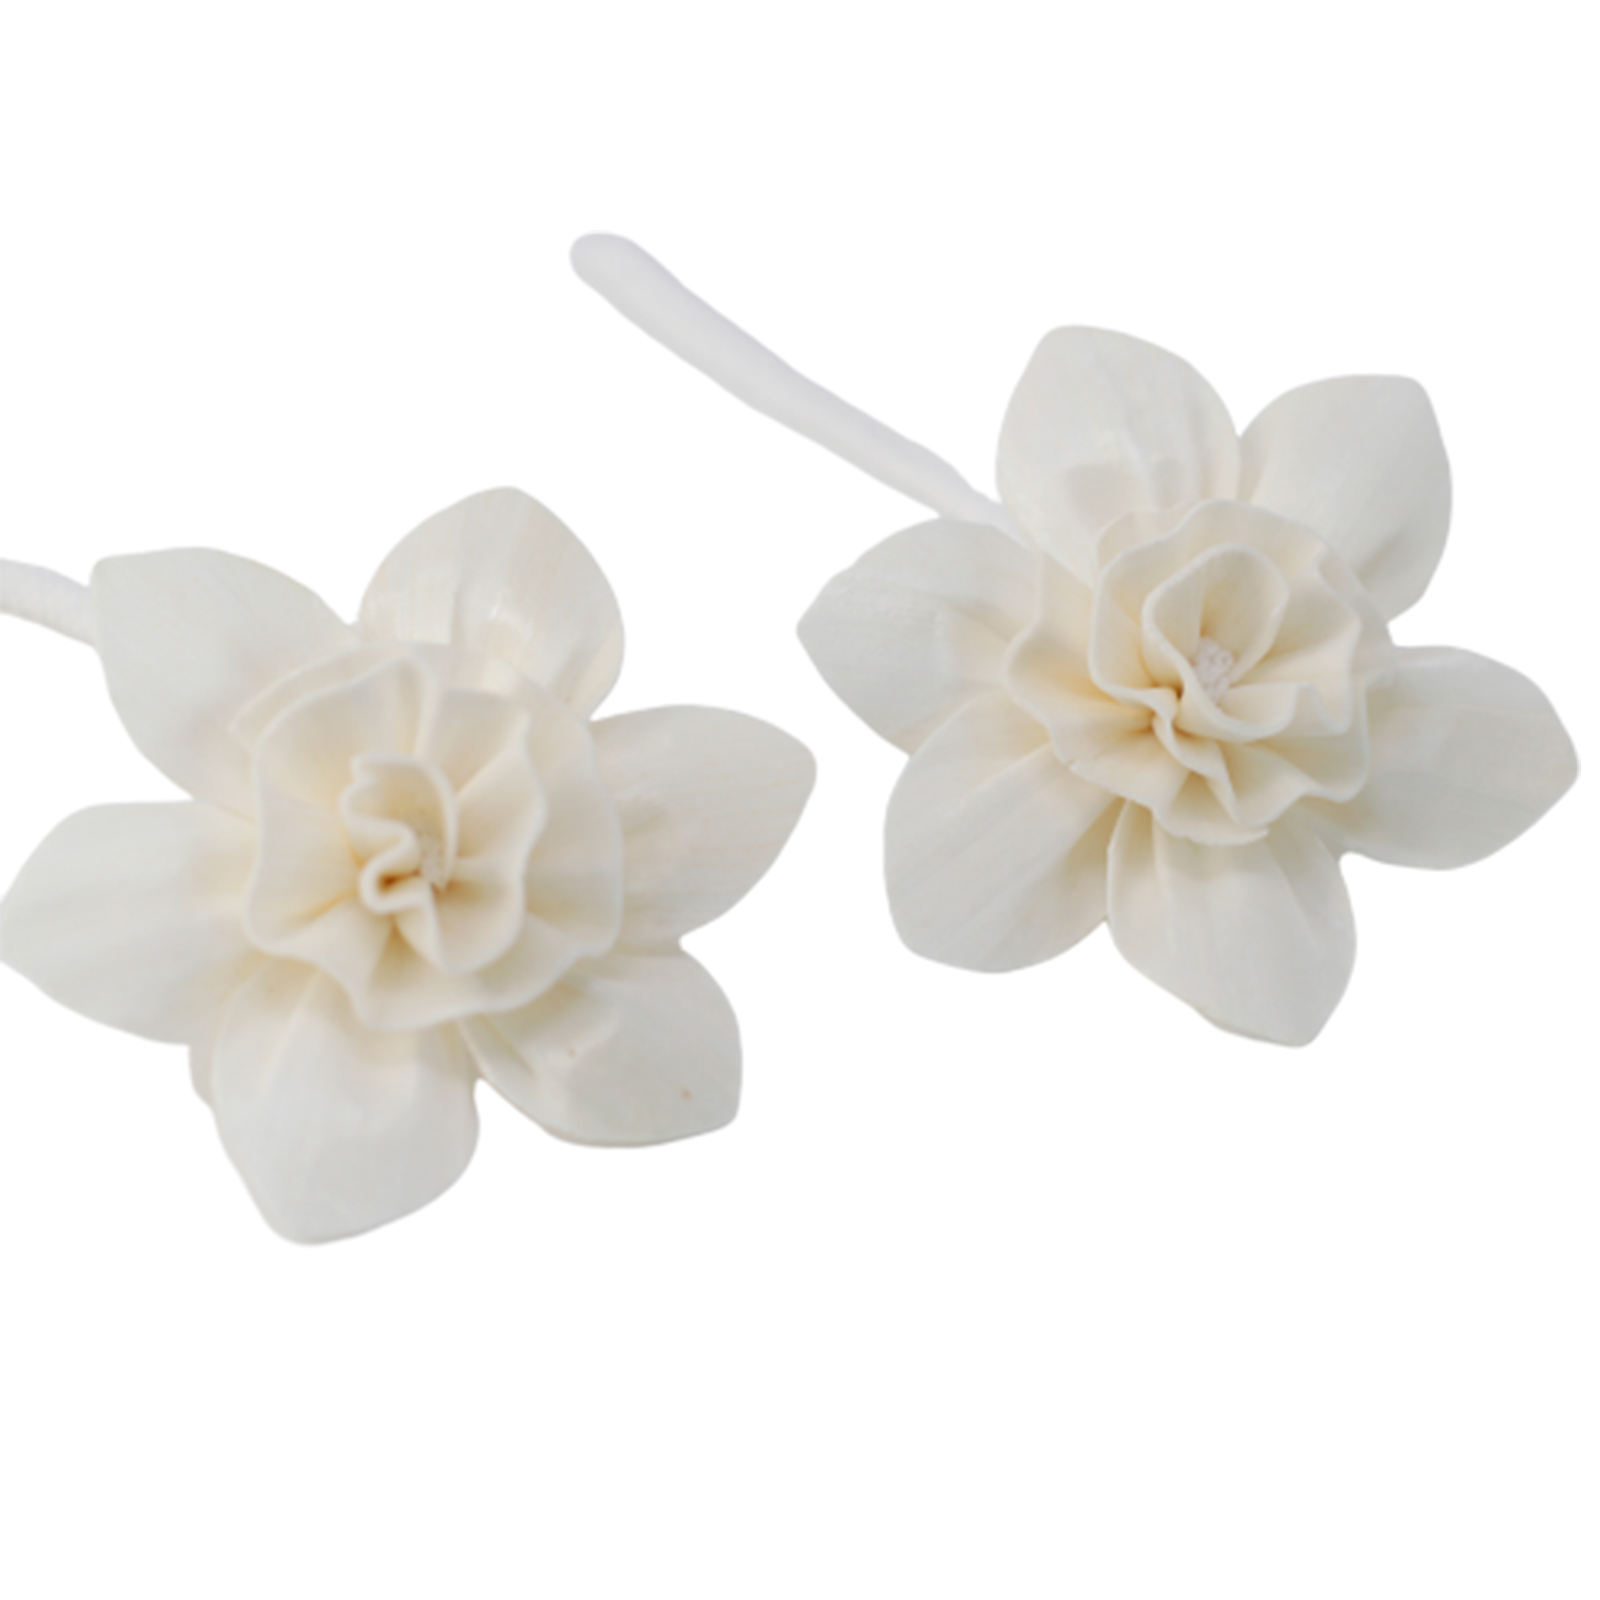 12 x Natural Diffuser Flowers - Large Lily on String